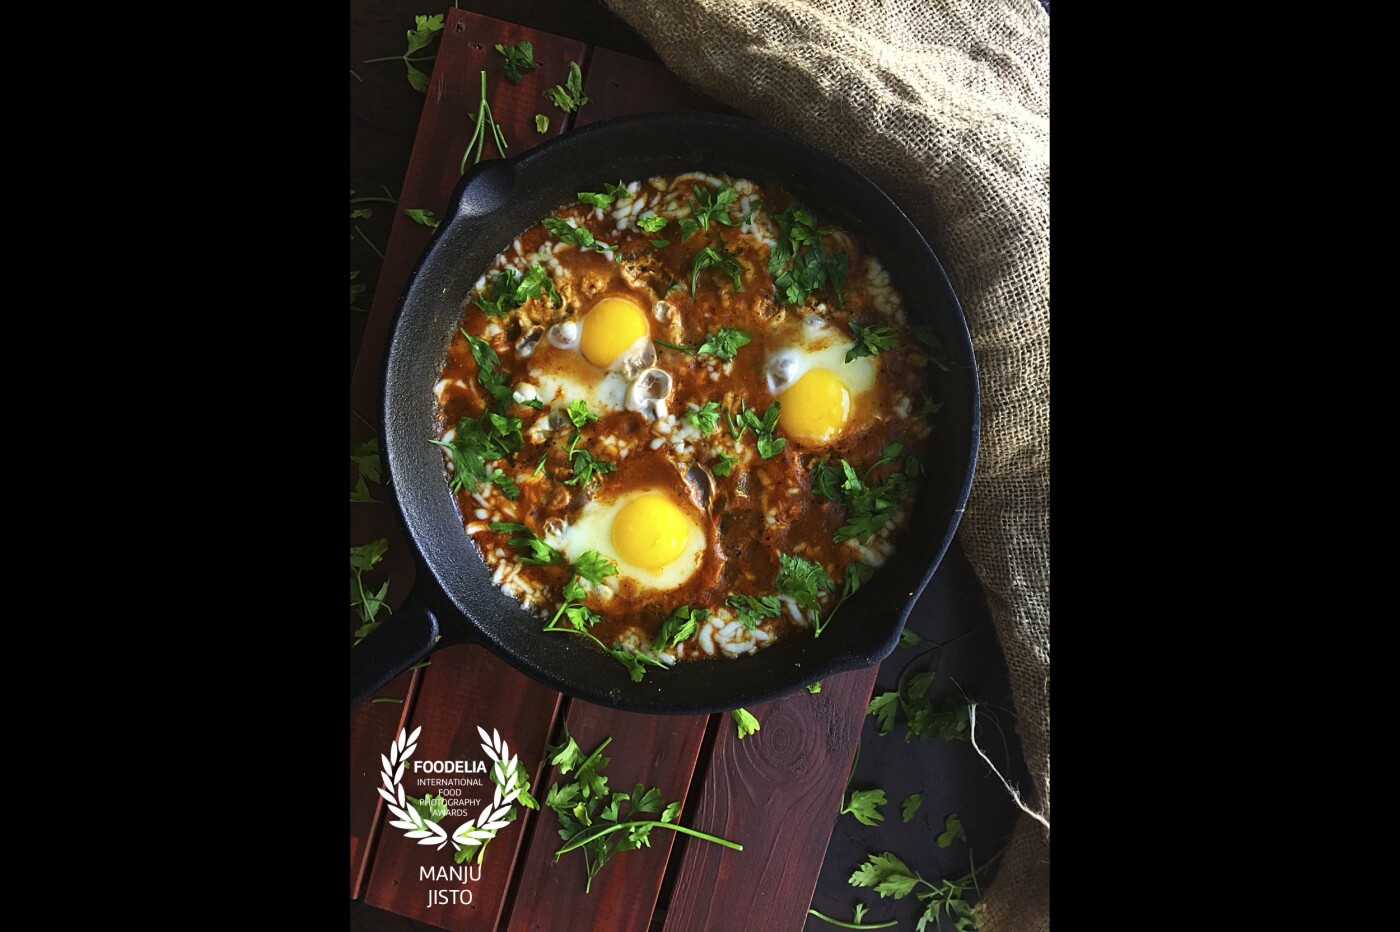 SHAKSHOUKA: It is perfect breakfast dish. Ingredients I added for this dish are tomatoes, onion, green bell pepper, cumin powder, kashmiri chilly powder, black pepper powder, garlic, dry oregano, dry basil, fresh parsley, olive oil, and eggs.  